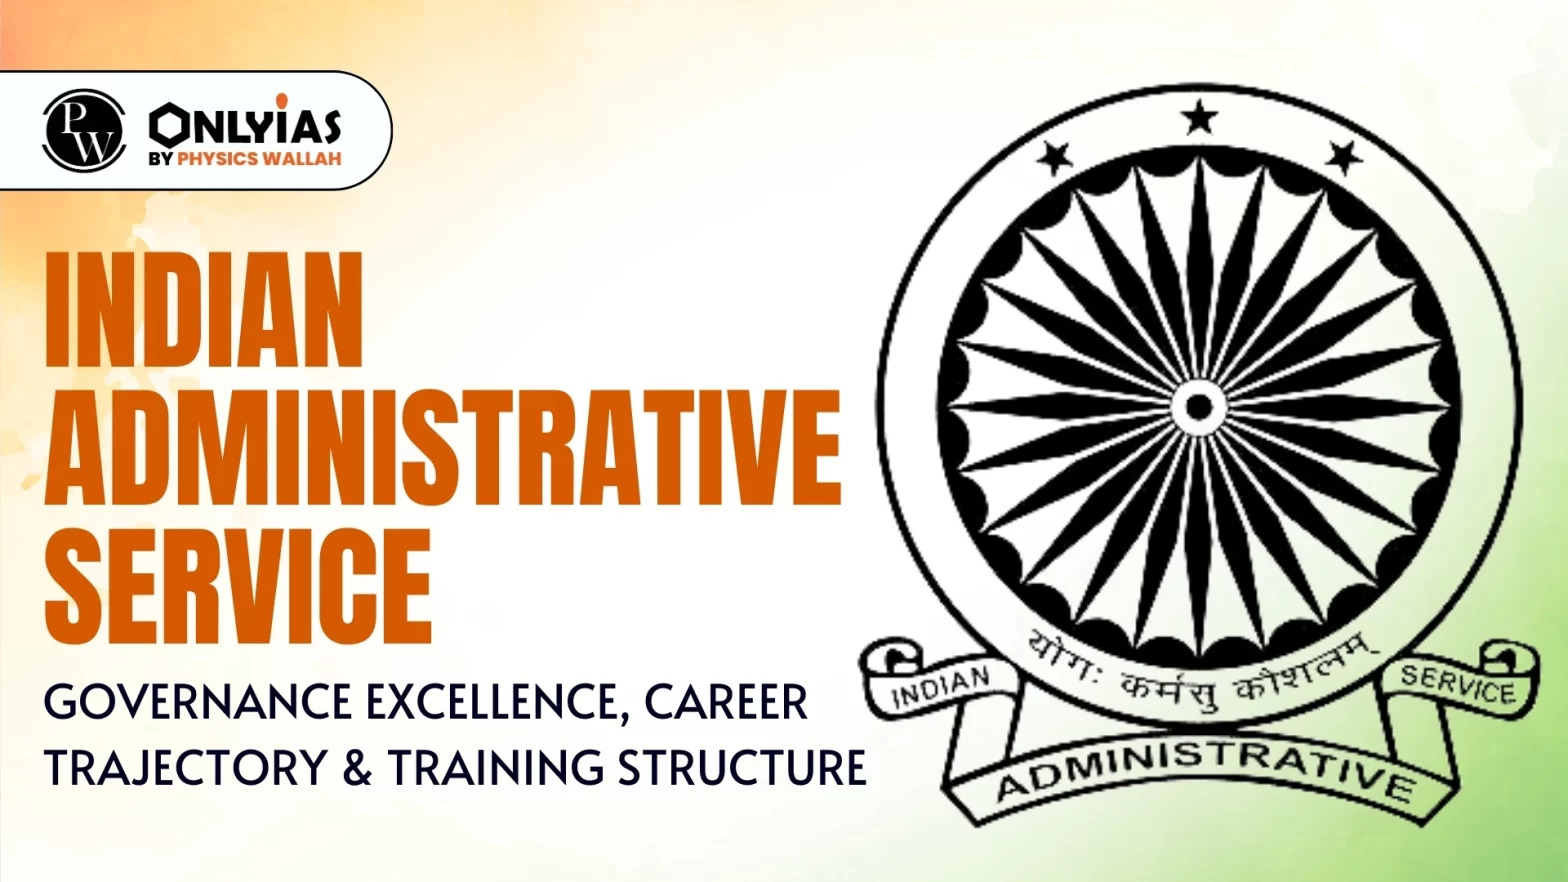 Indian Administrative Service: Governance Excellence, Career Trajectory & Training Structure